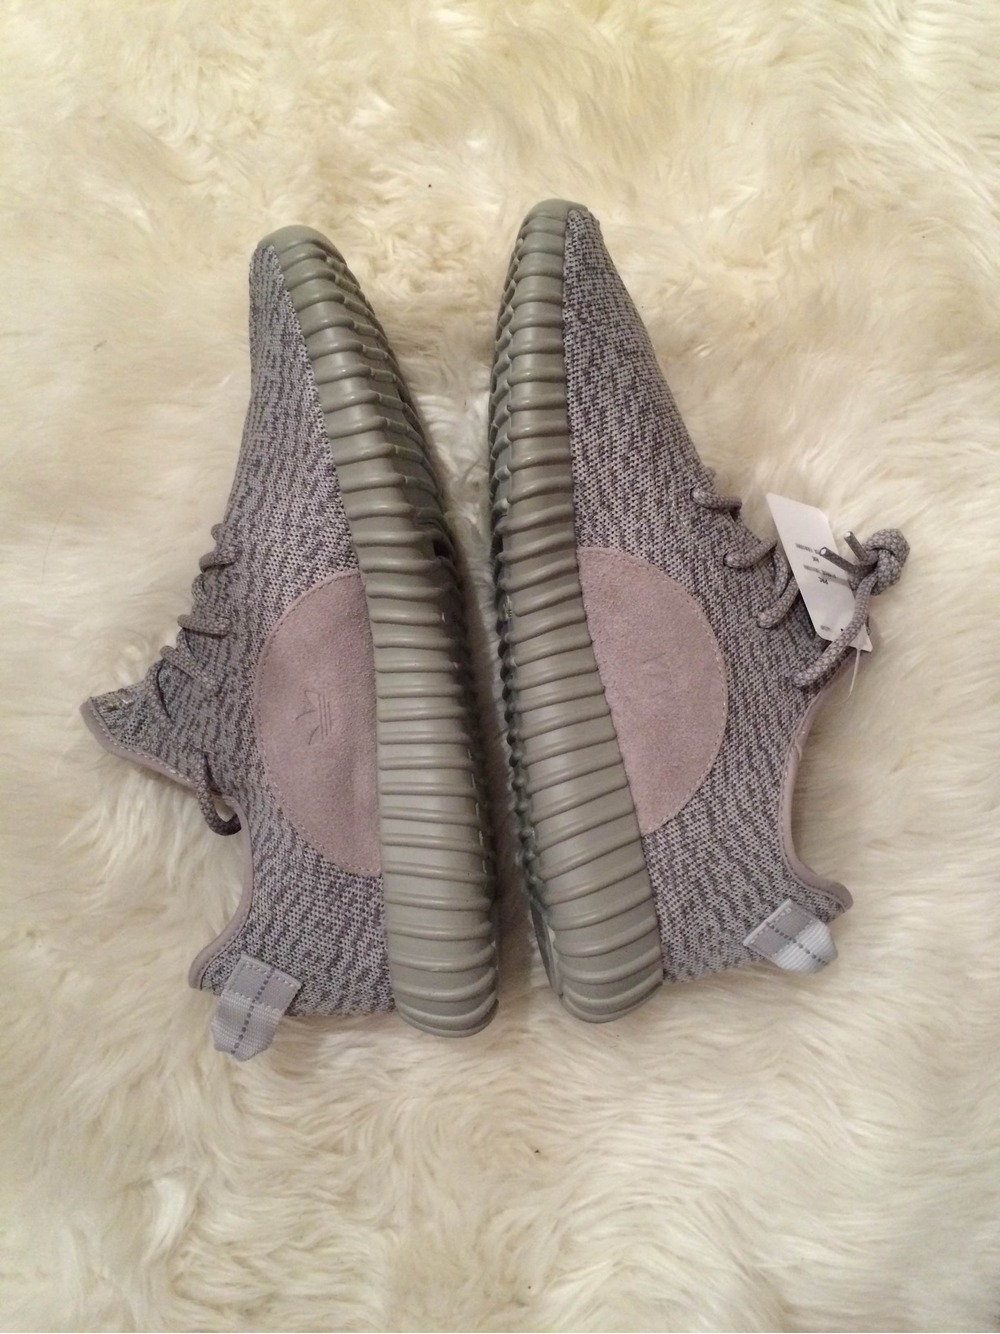 Yeezy Boost 350 Moonrock replica Review & On foot 